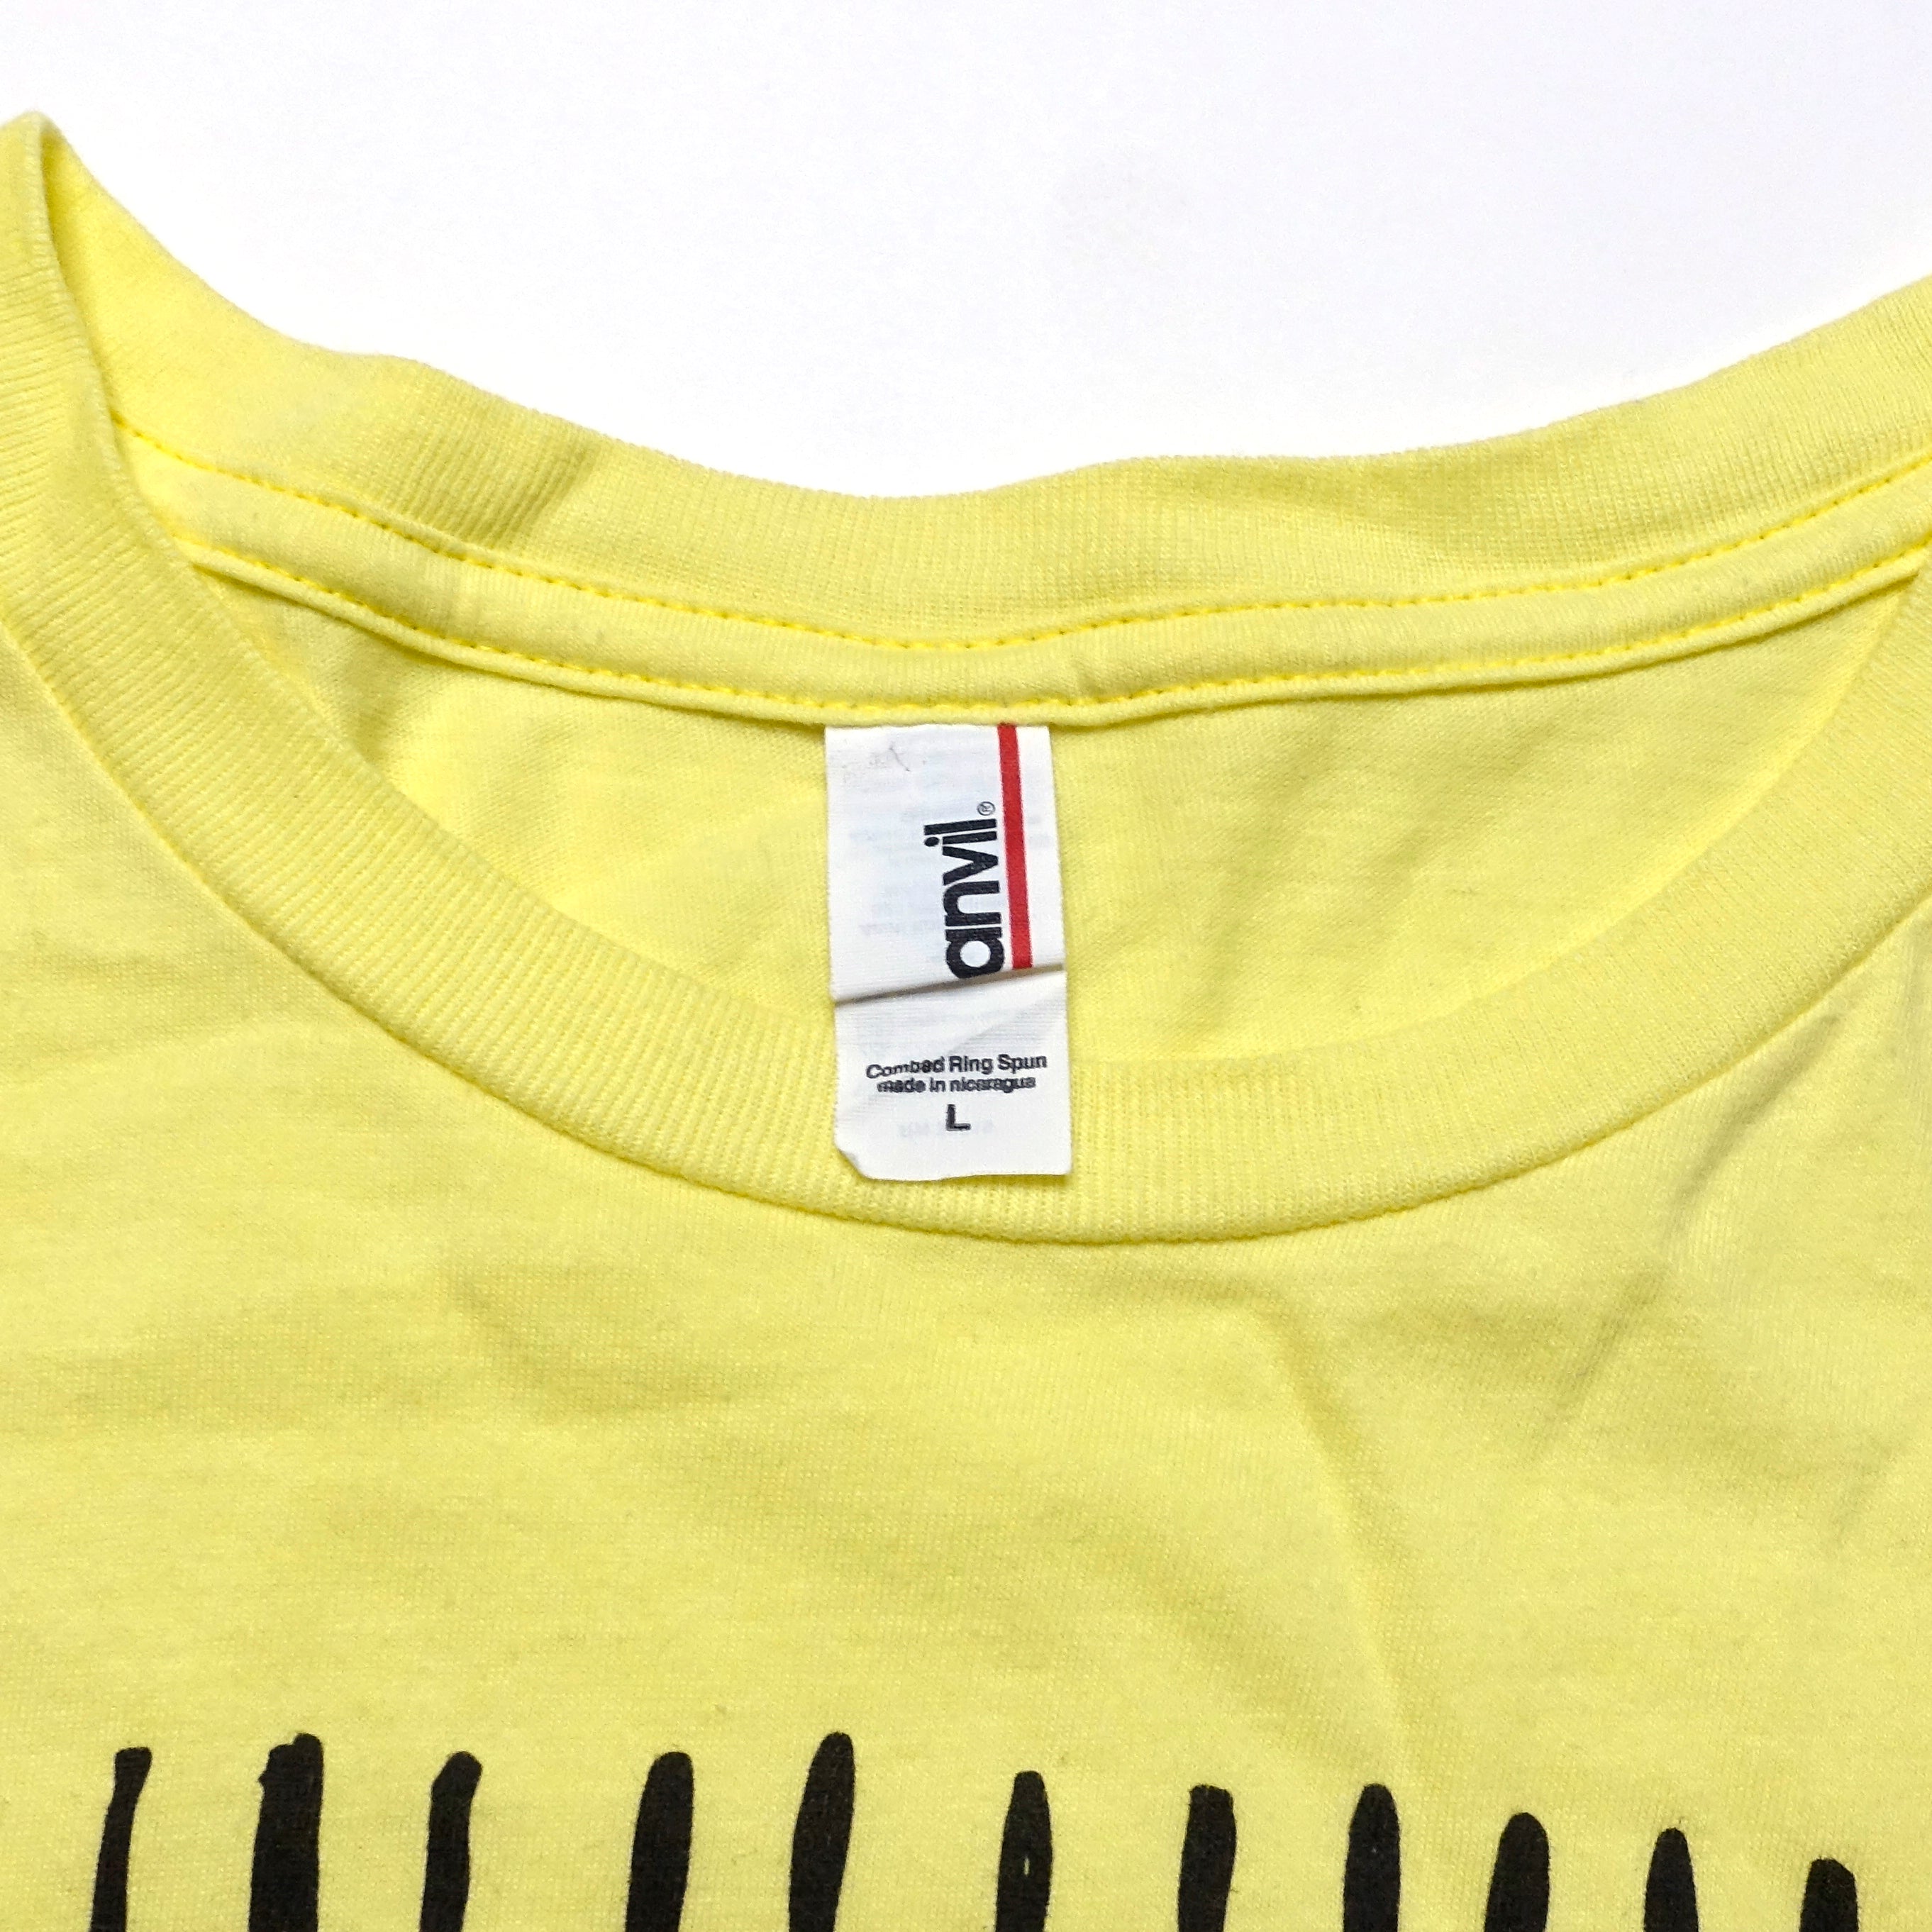 Descendents / ALL - Filmage Premiere Shirt Yellow Size Large